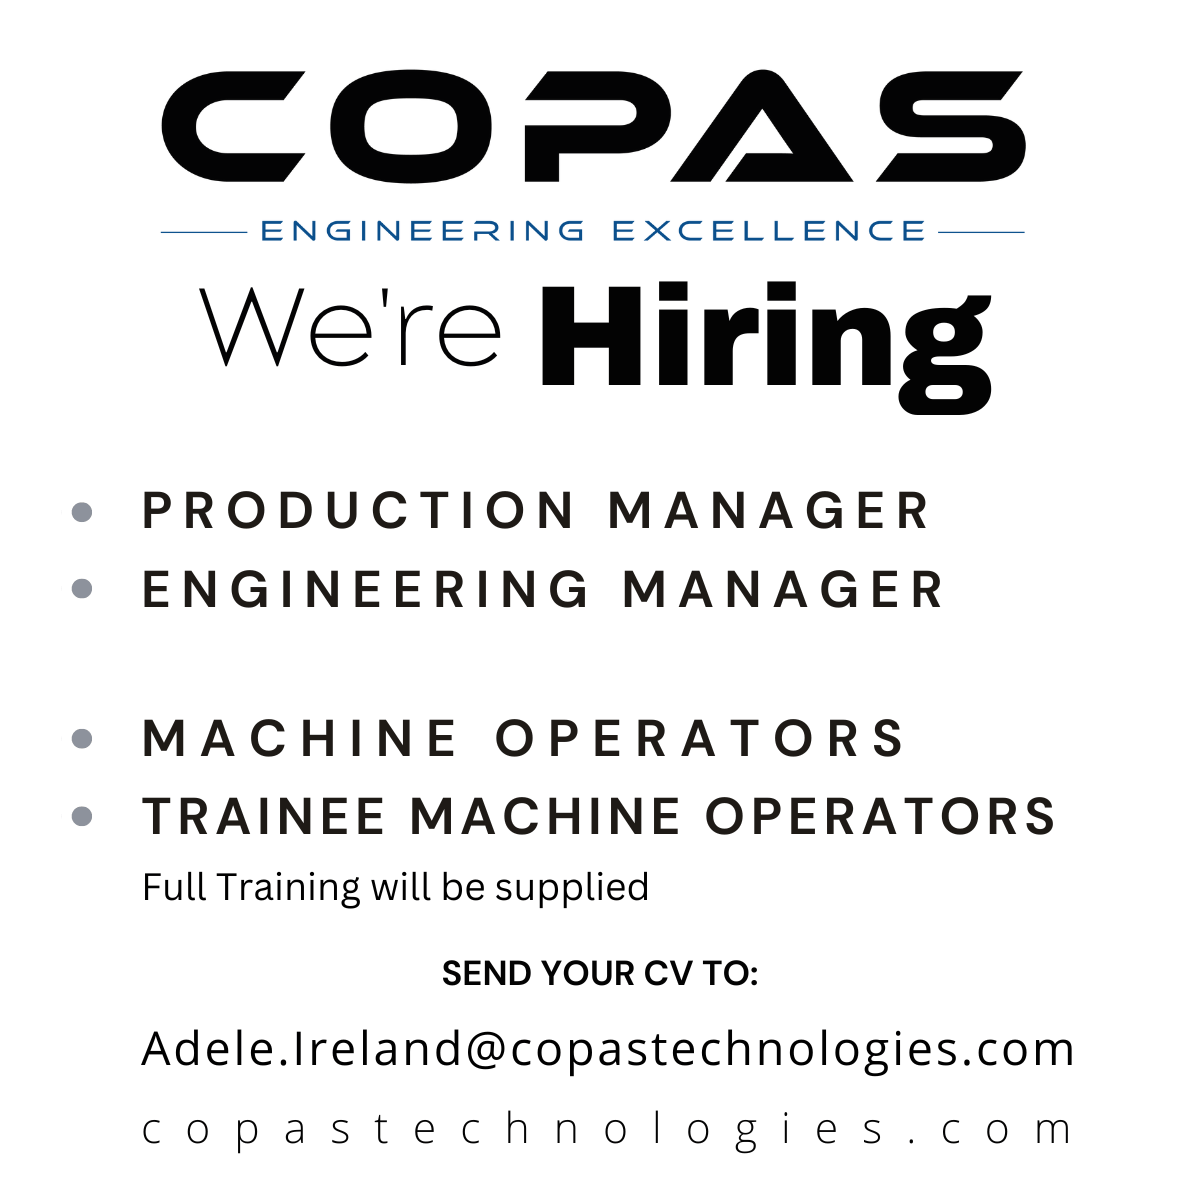 Latest job opportunities - Production Manager, Engineering Manager, Machine Operators, Trainee machine Operators